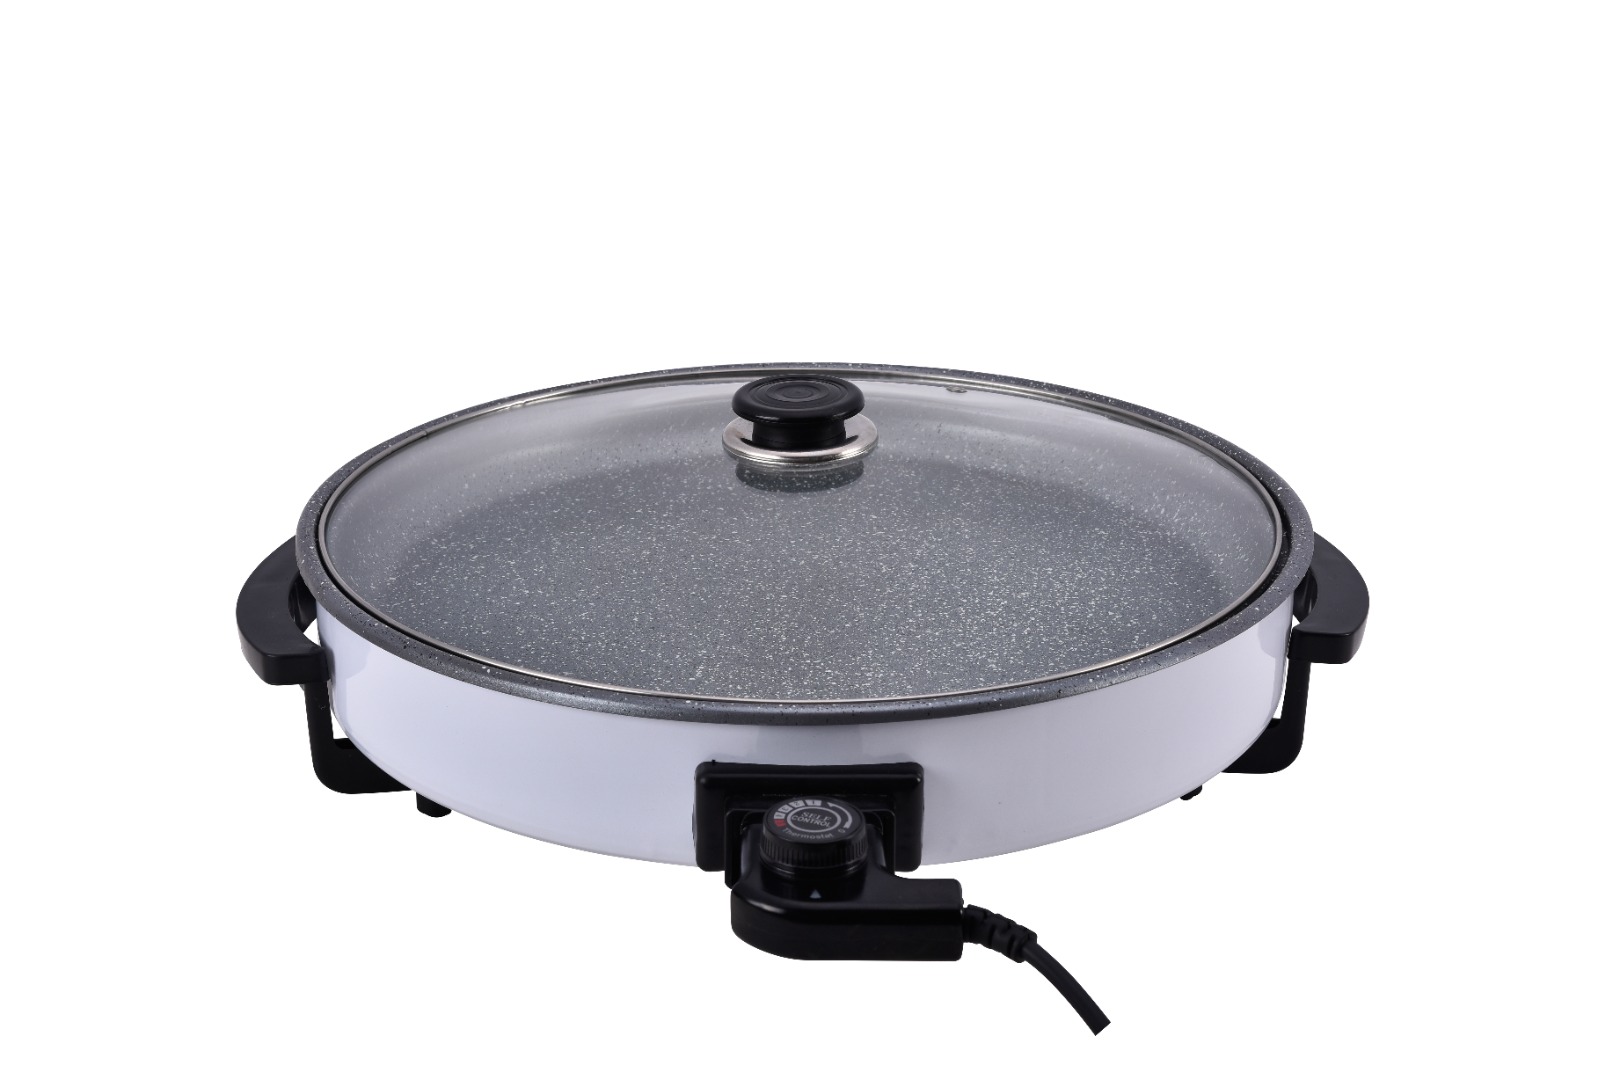 42cm wholesale round electric grill pan with pancake maker 4cm depth 1500w KH-P42